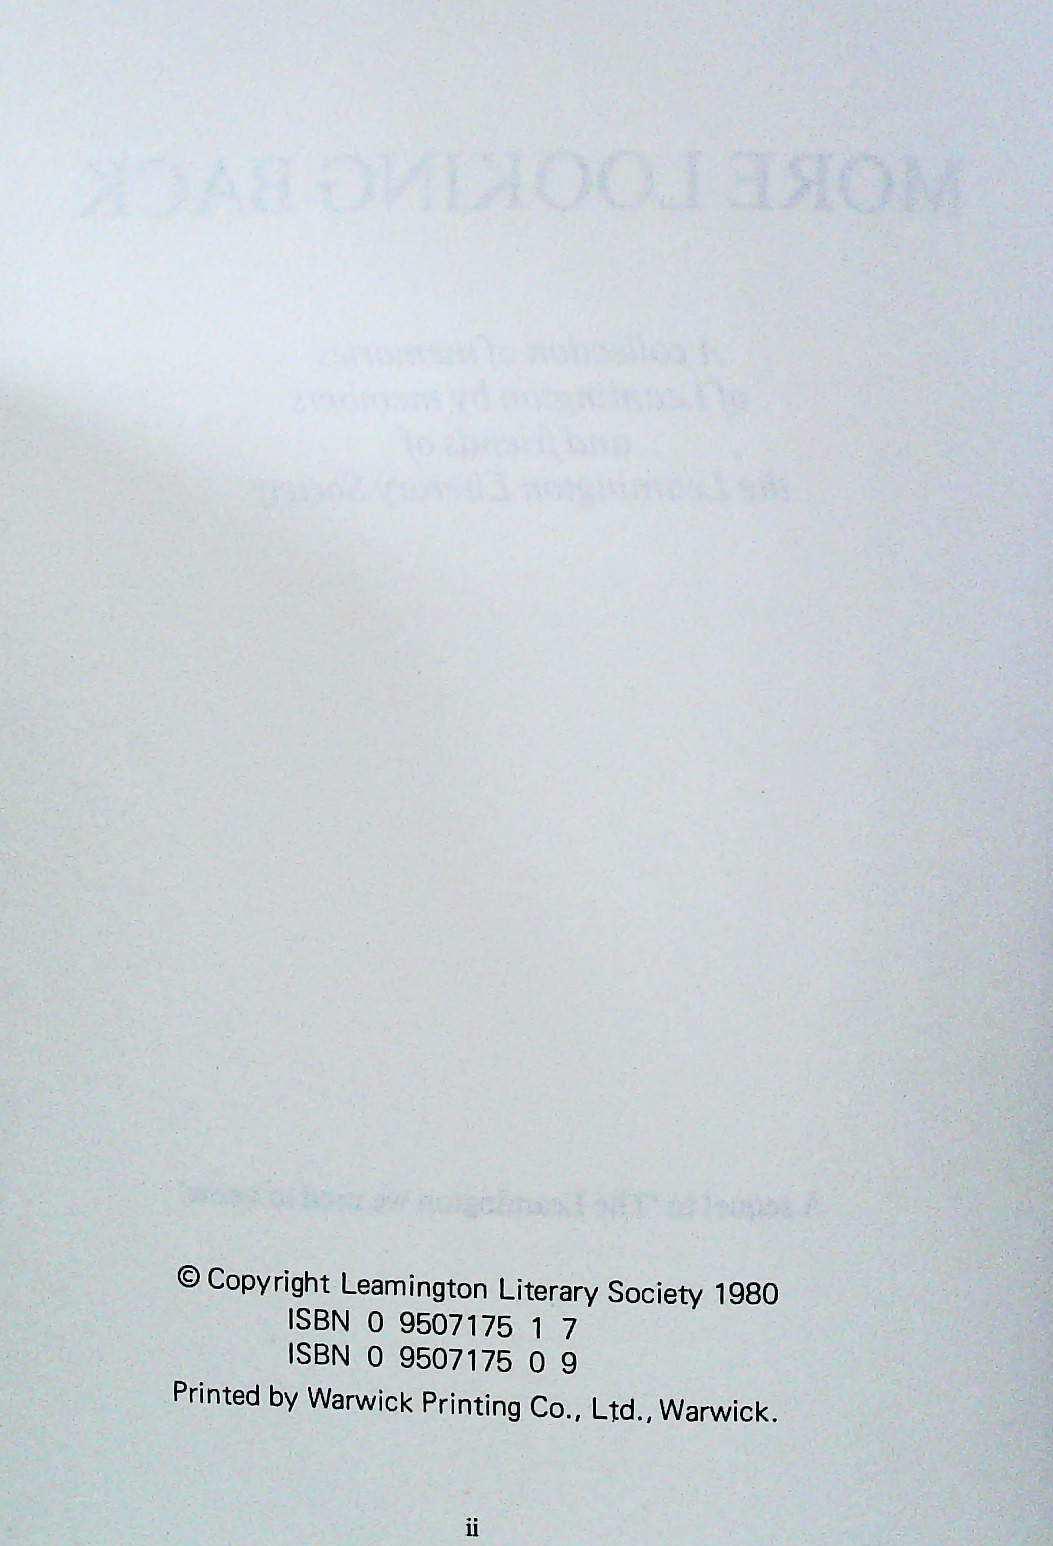 More Looking Back paperback book by The Leamington Literary Society. Published 1980. 181 pages. - Image 3 of 3